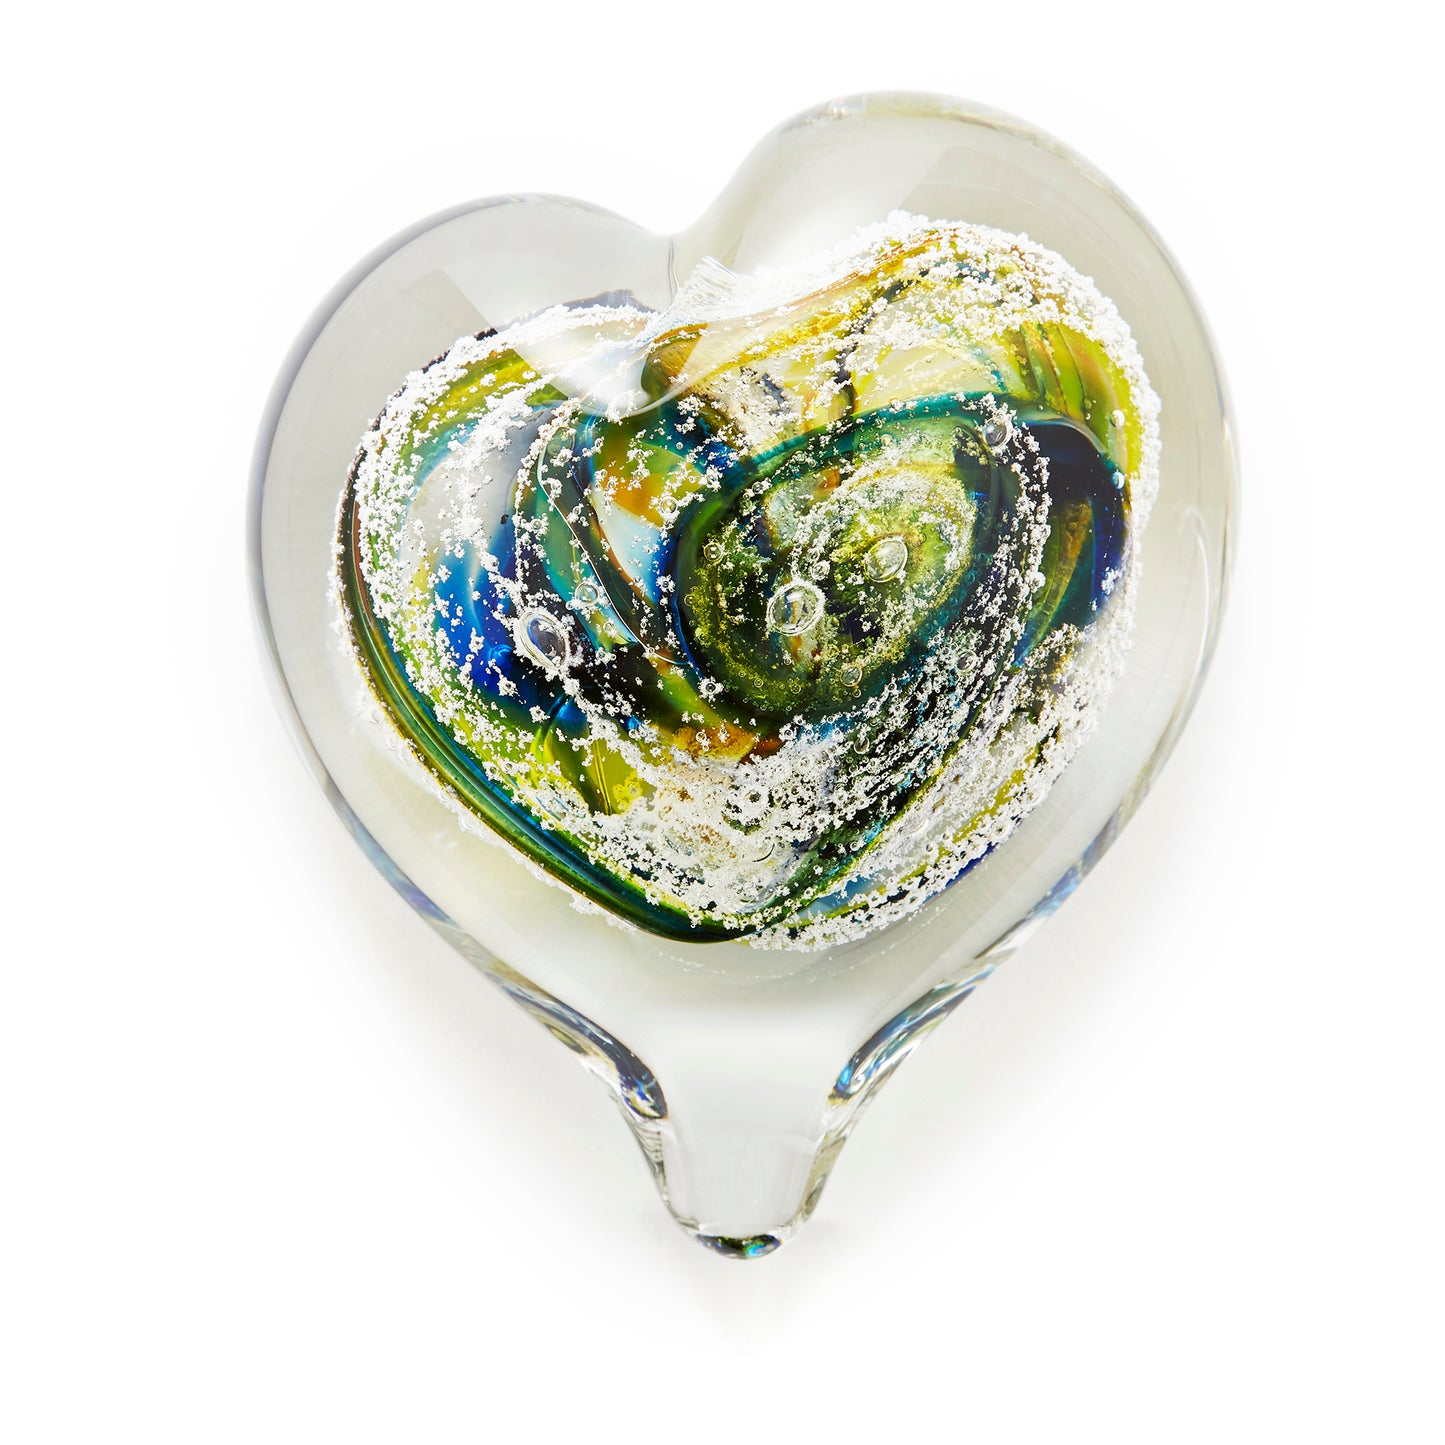 Memorial glass art heart paperweight with cremation ash. Purple, blue, green, pink, and yellow glass. Colour combination is called "Spring."